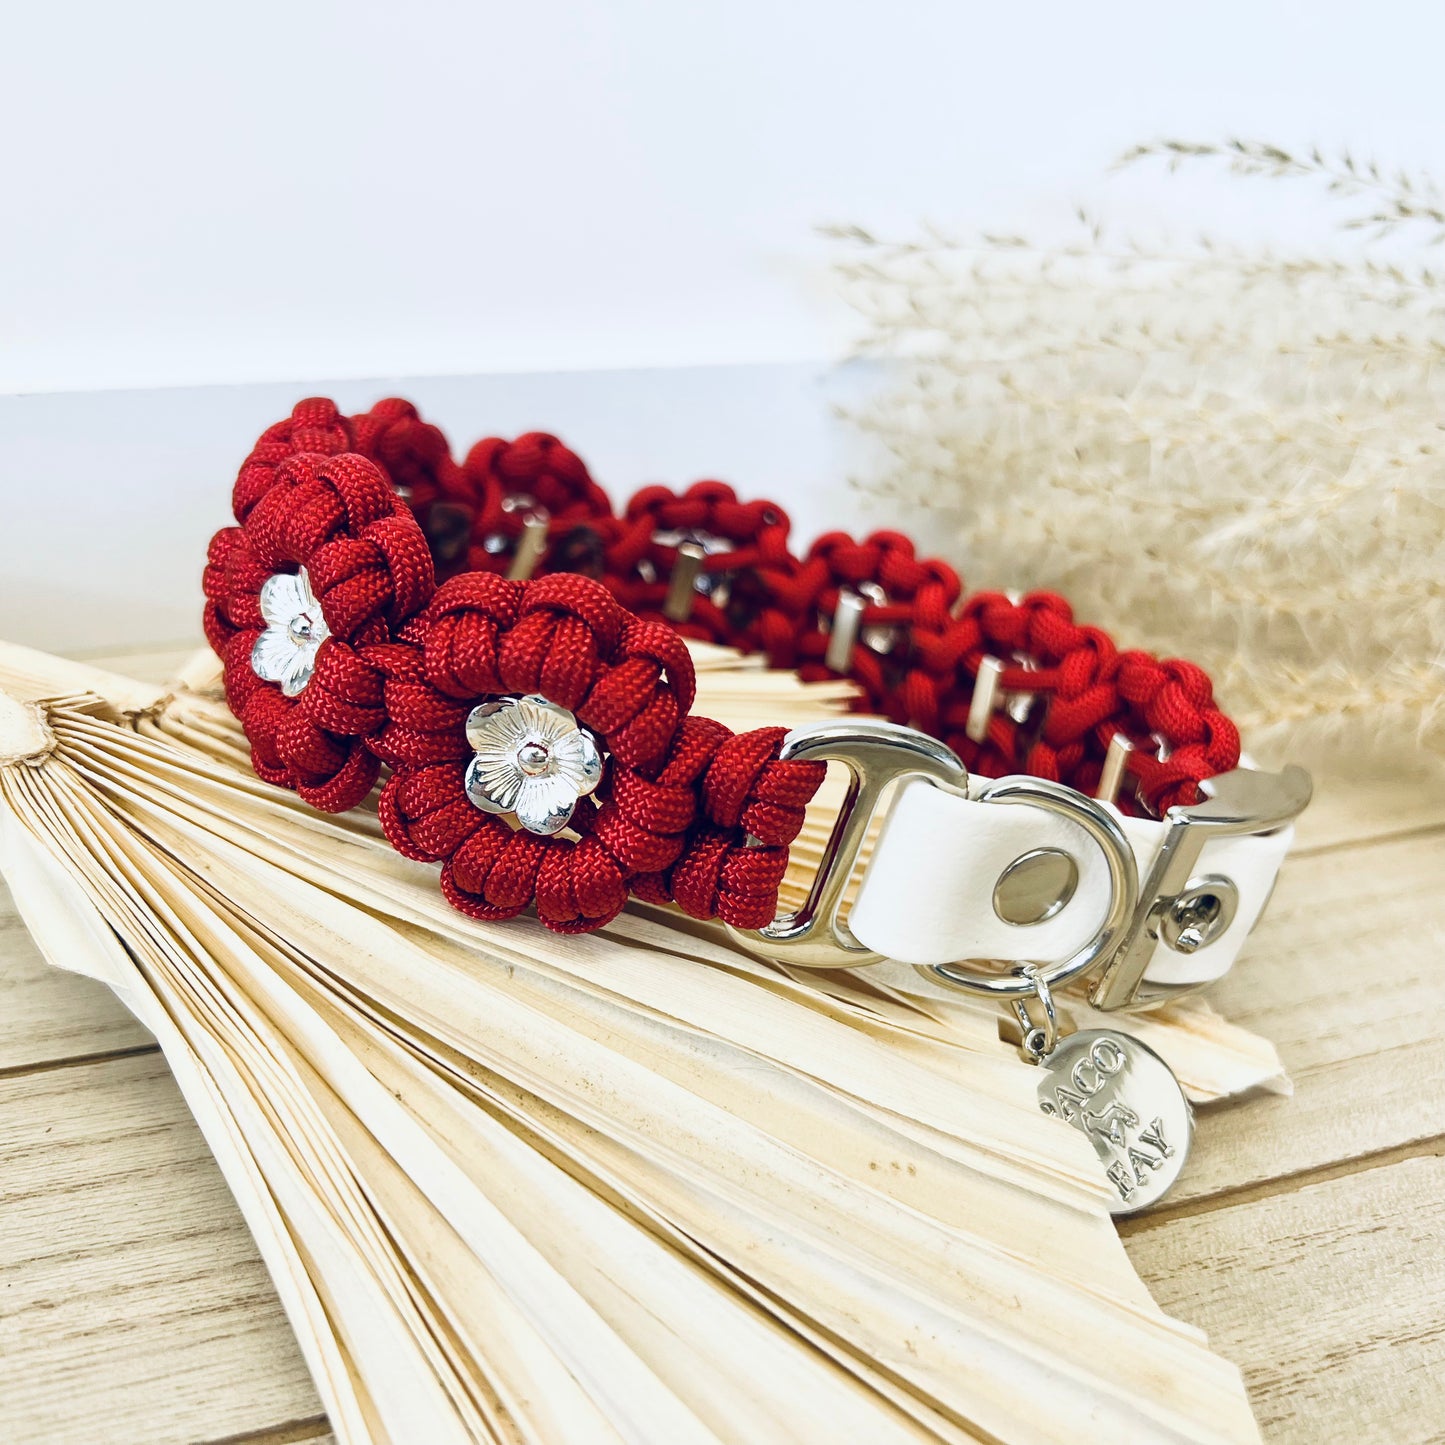 PACO & FAY Paracord Halsband in rot, Blumenmuster, Biothane®, Imperial Red, Flower Power Halsband, Aztec Sun Bar